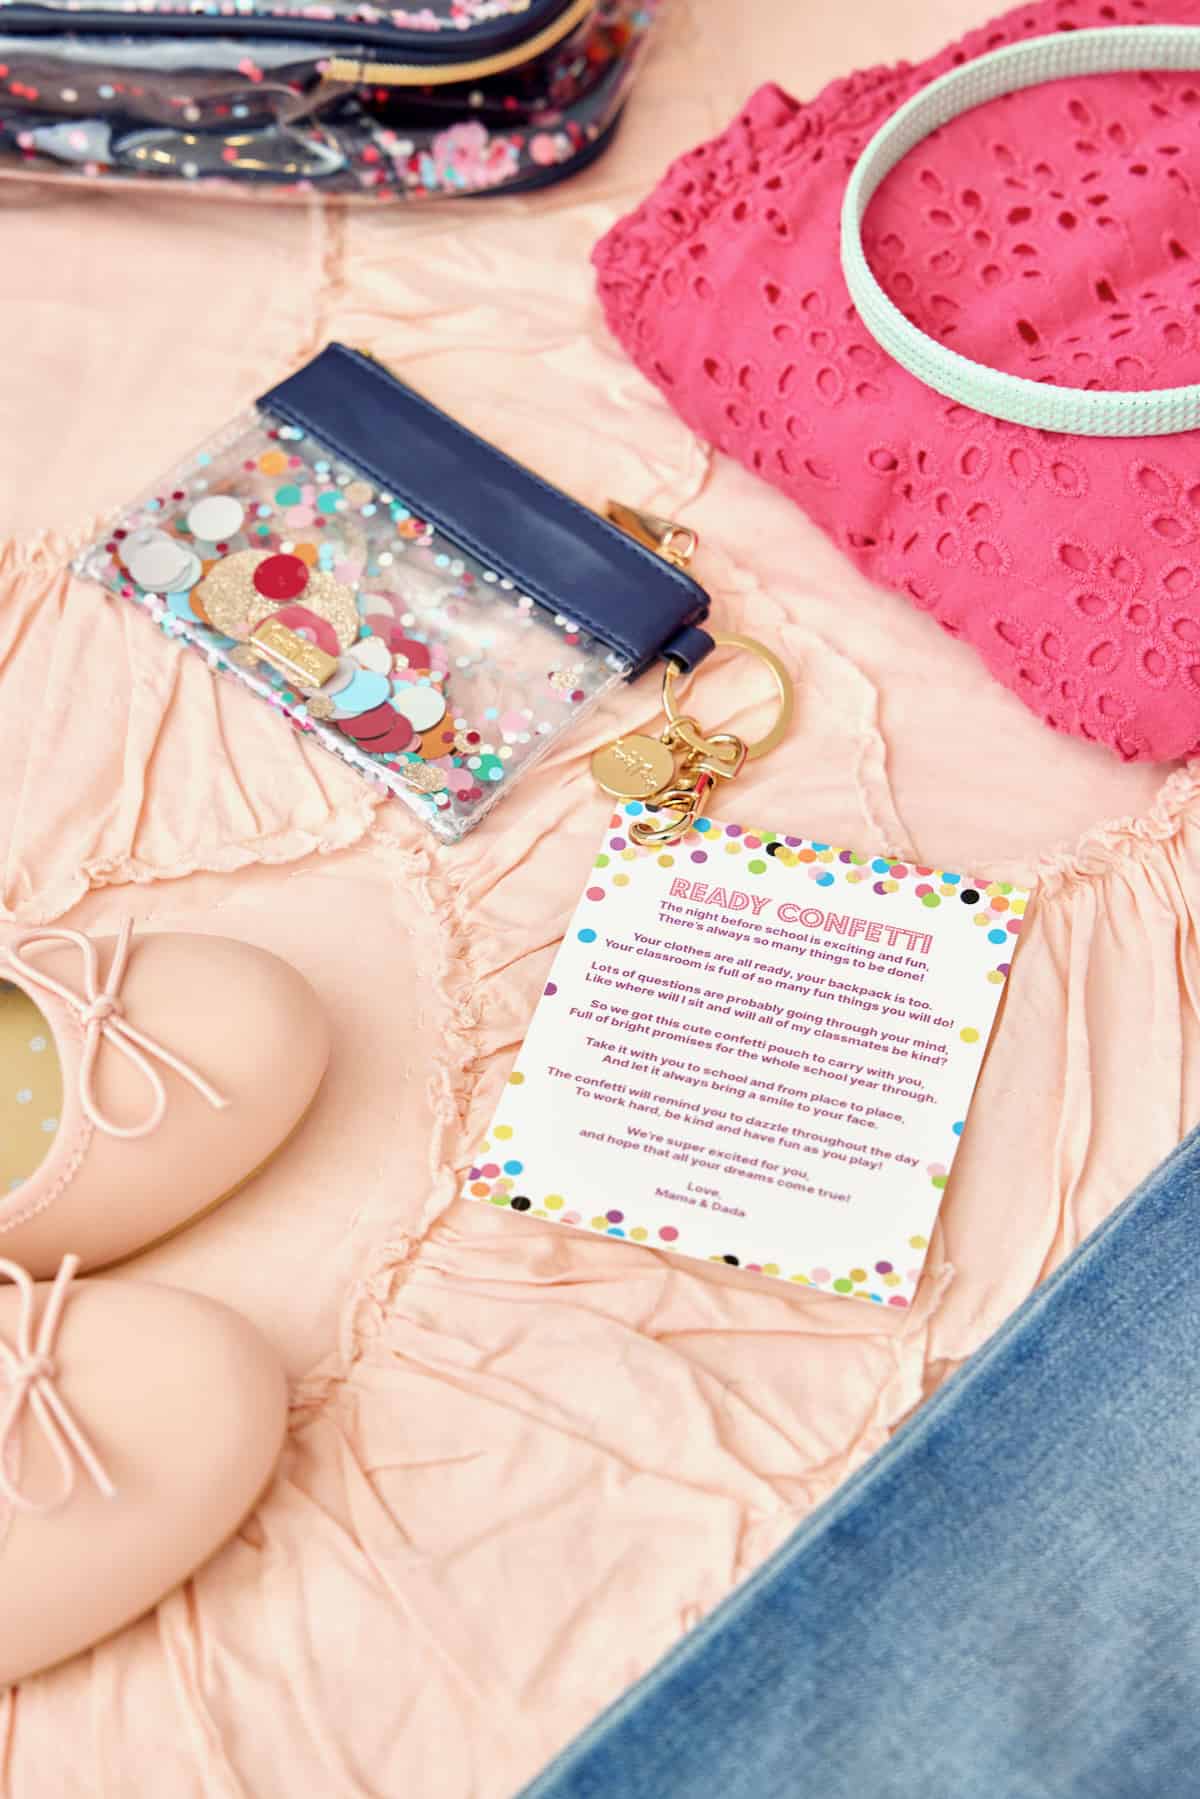 A small glittery keychain pouch, a pair of pink children's ballet flats and a bright pink children's eyelet-toe shirt on a light pink ruffled bedspread.